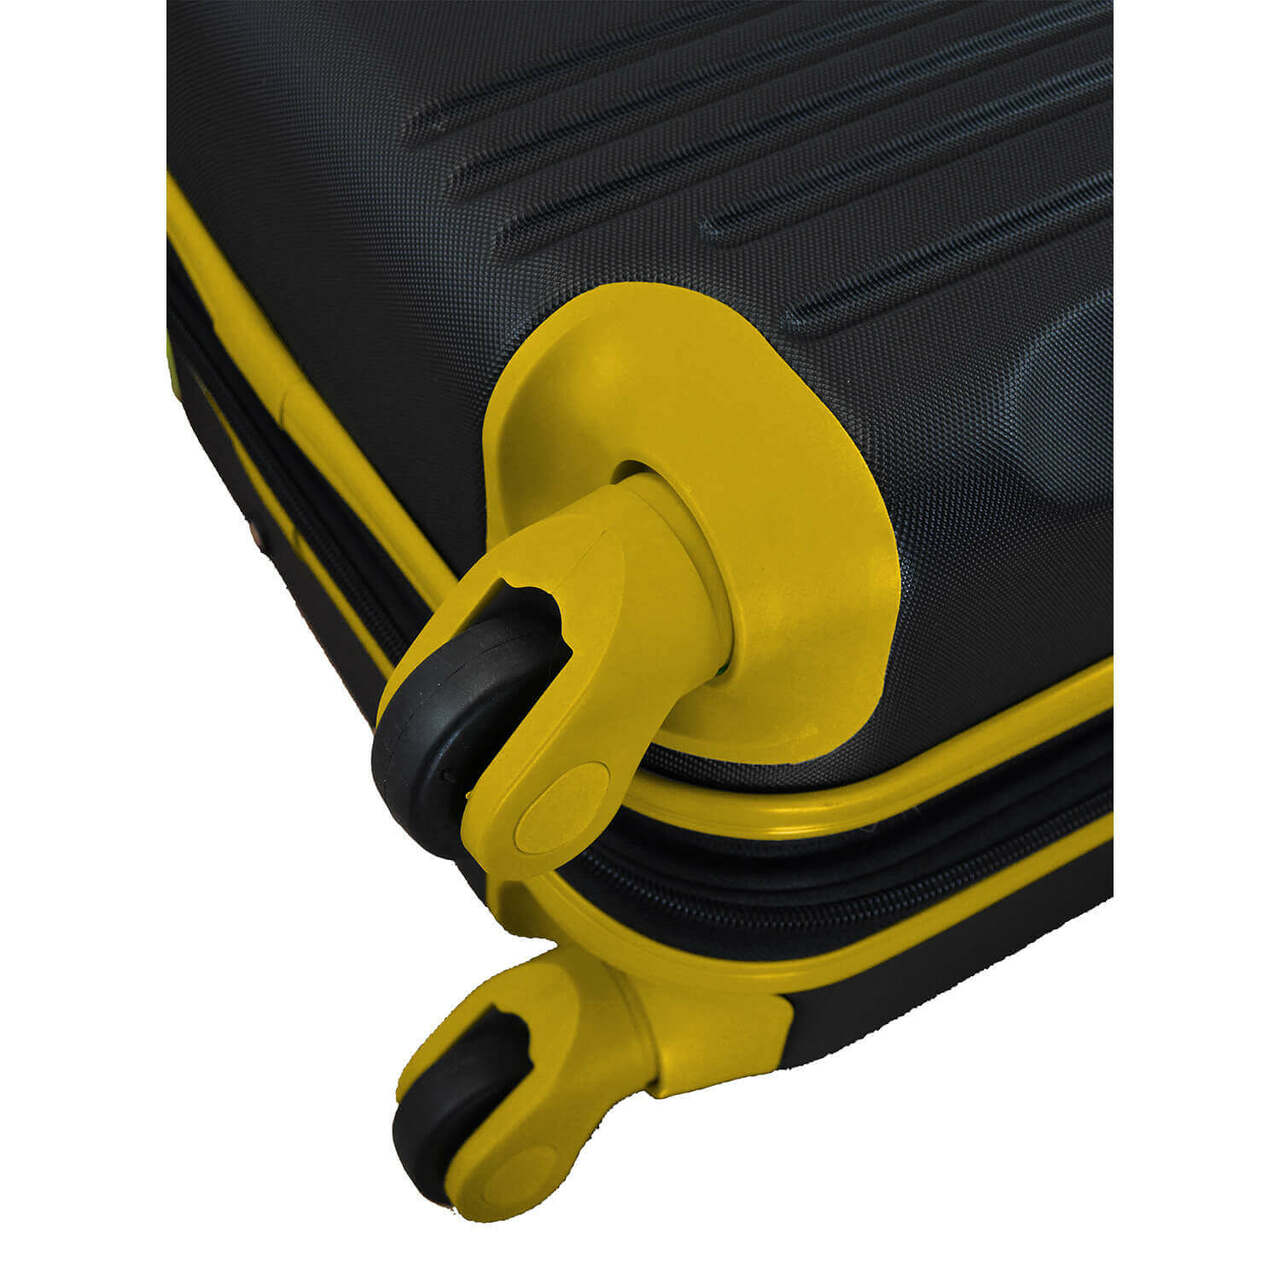 Bruins Carry On Spinner Luggage | Boston Bruins Hardcase Two-Tone Luggage Carry-on Spinner in Yellow